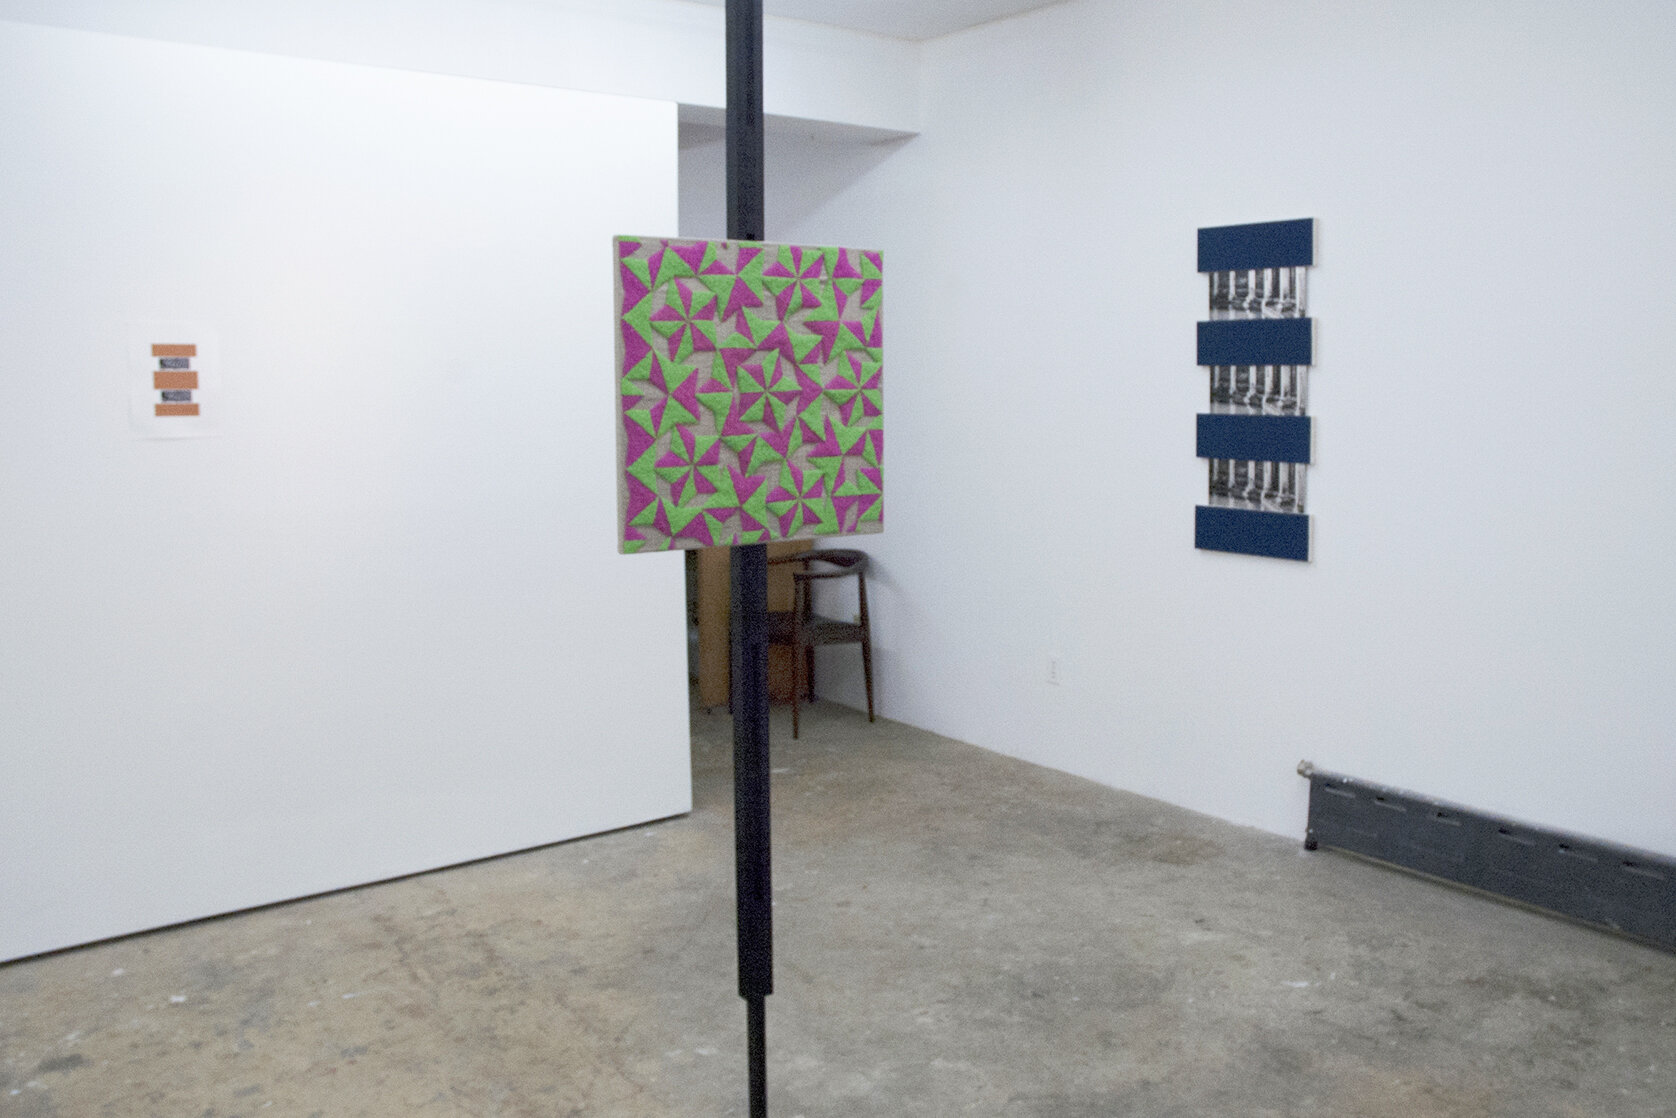 Installation image from the 2013 exhibition, Sabine Boehl, F.P. Boué, Sebastian Freytag, at Cindy Rucker Gallery